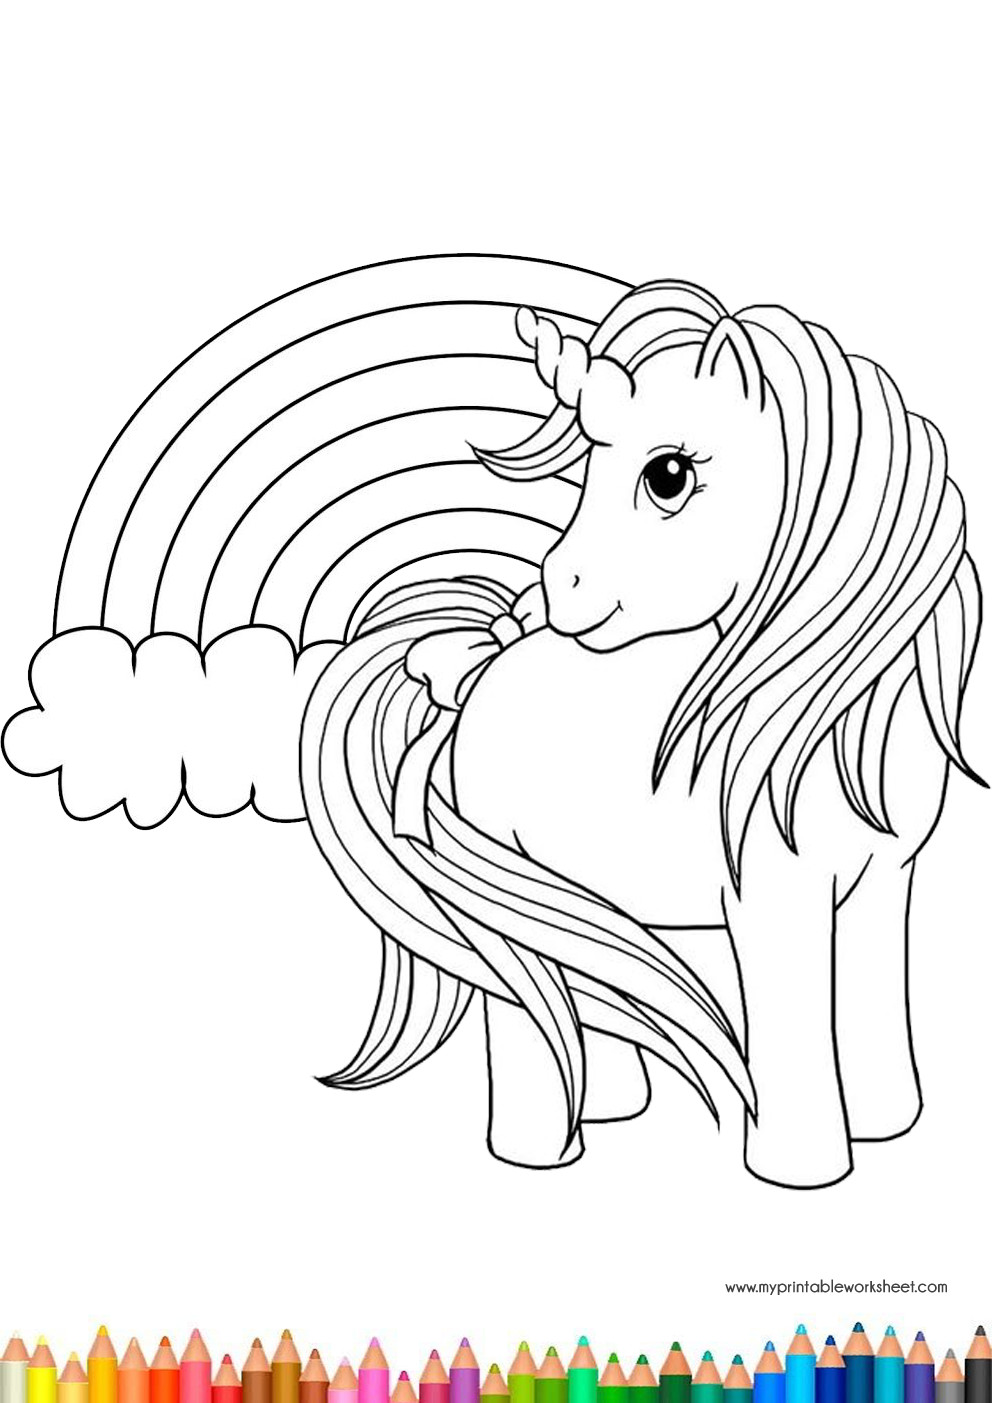 Unicorn Coloring Sheets For Kids
 Easy Cute Unicorn Coloring Pages for Kids and Girls